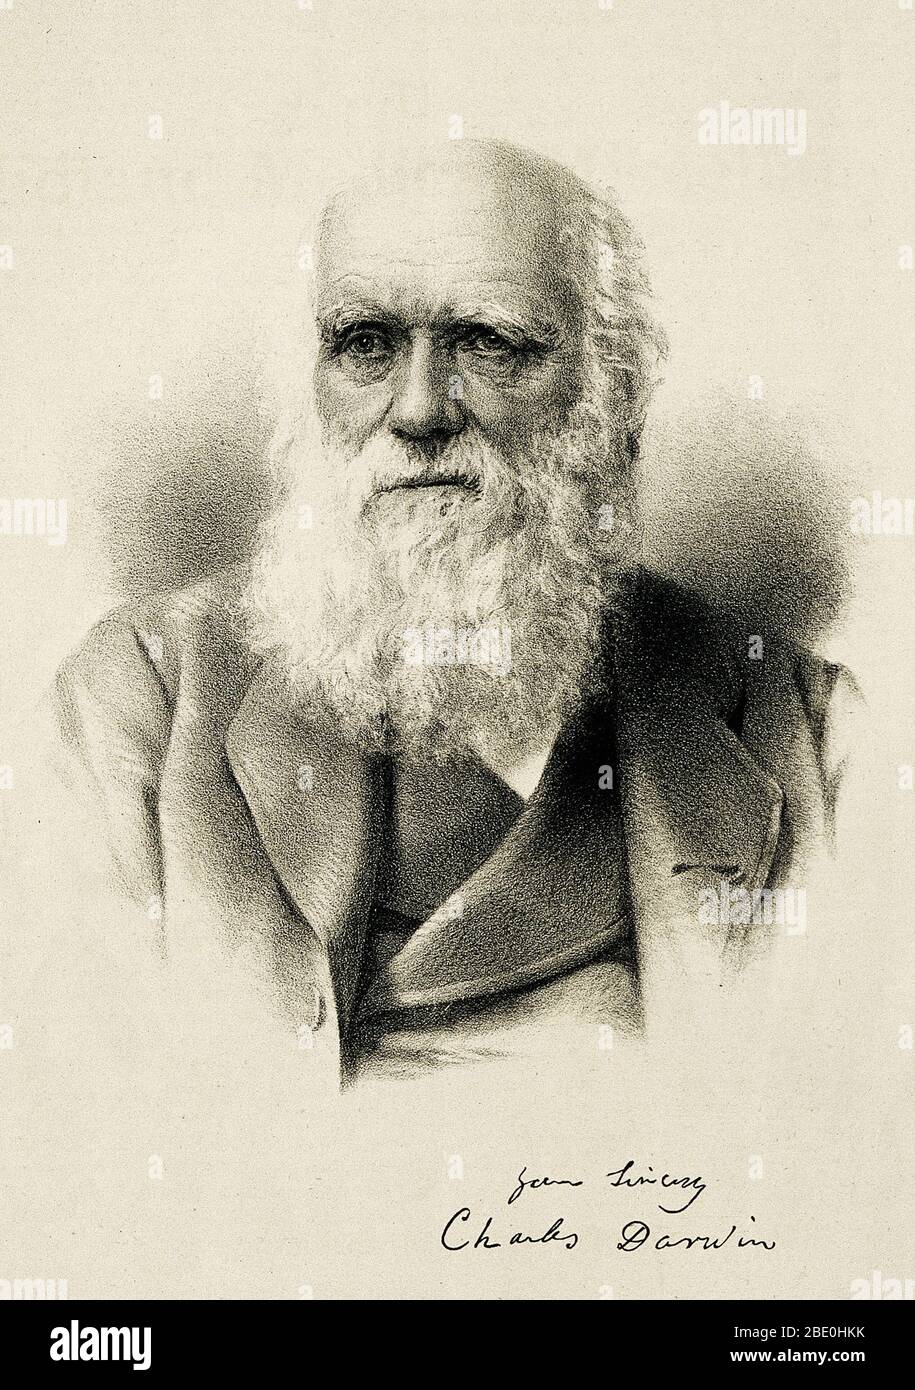 Charles Robert Darwin (February 12, 1809 - April 19, 1882) was an English naturalist, geologist and biologist. Studies at the University of Cambridge encouraged his passion for natural science. Puzzled by the geographical distribution of wildlife and fossils he collected on the five-year voyage on HMS Beagle, Darwin began detailed investigations and in 1838 conceived his theory of natural selection. Although he discussed his ideas with several naturalists, he needed time for extensive research and his geological work had priority. He was writing up his theory in 1858 when Alfred Russel Wallace Stock Photo